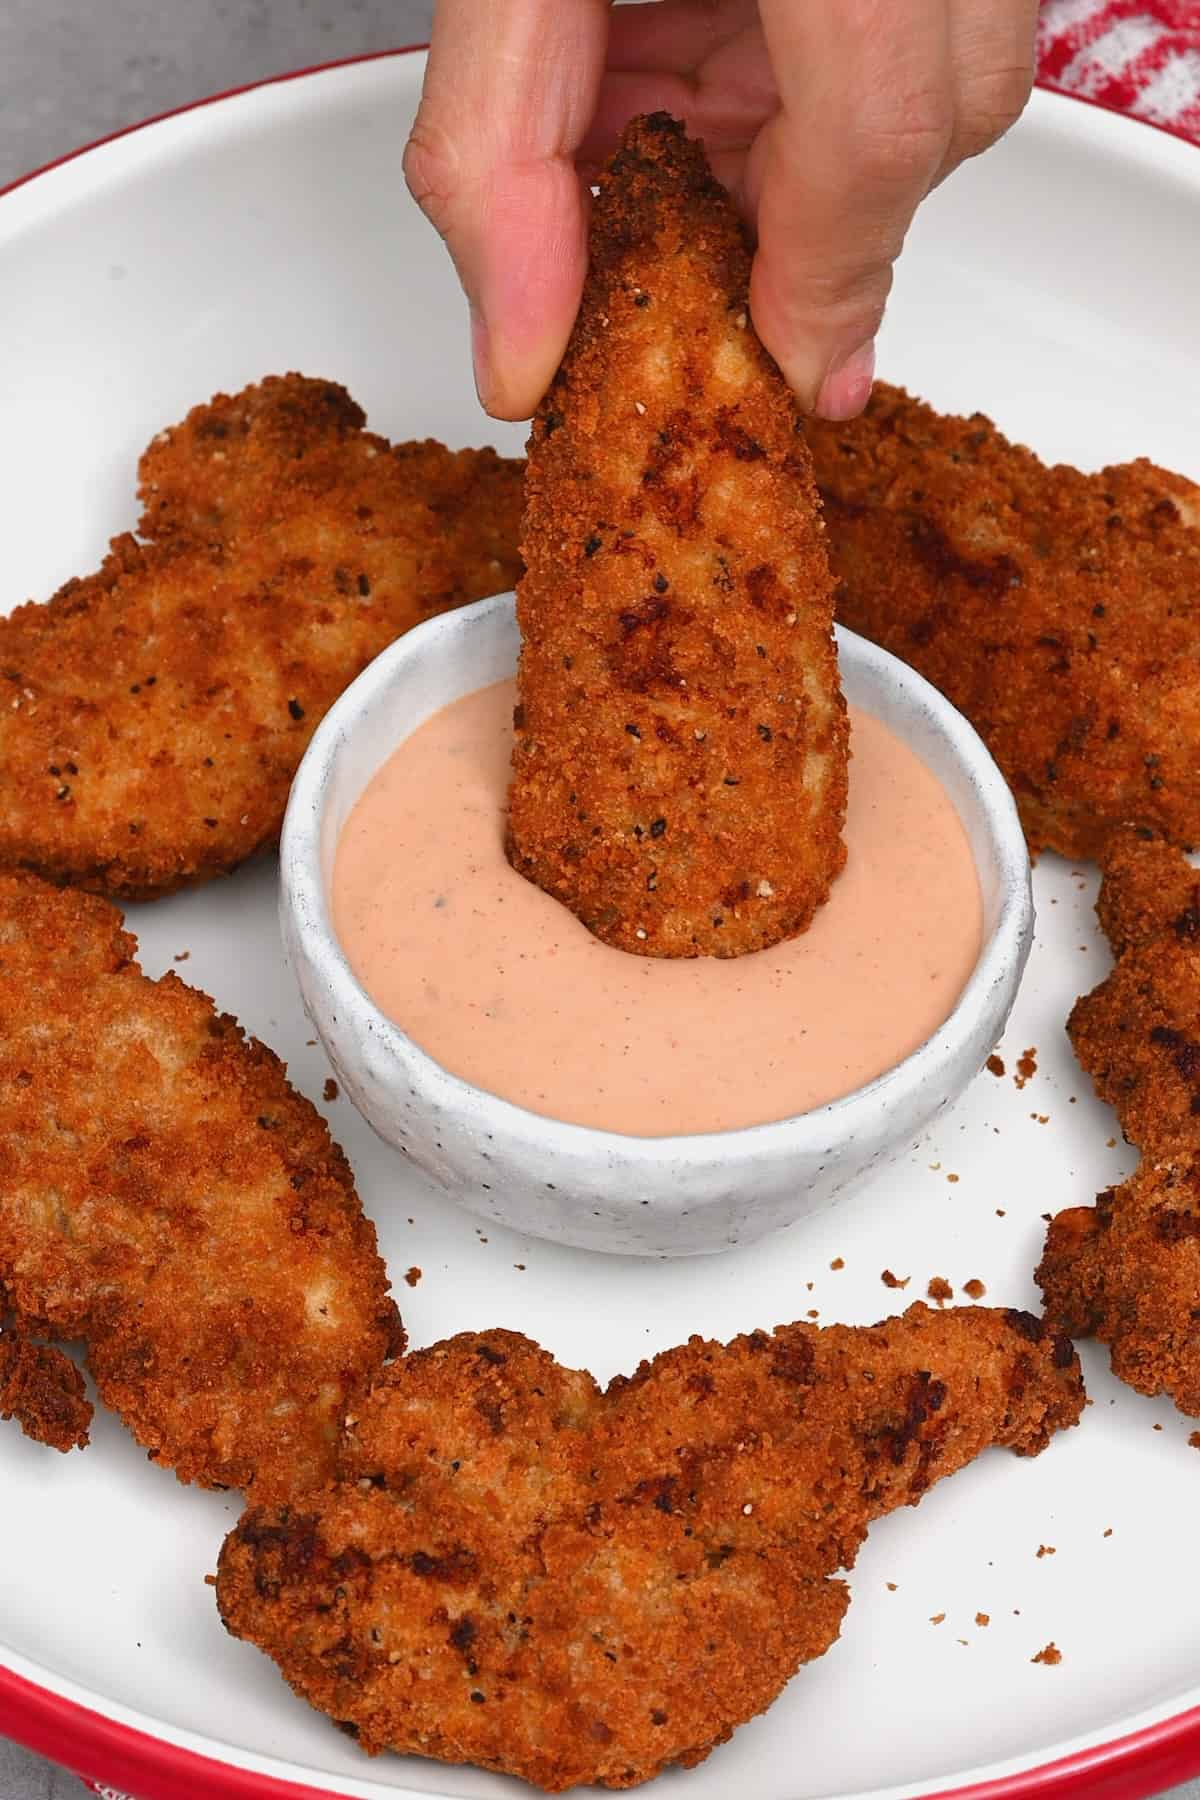 Dipping chicken tenders in Raising Cane's sauce